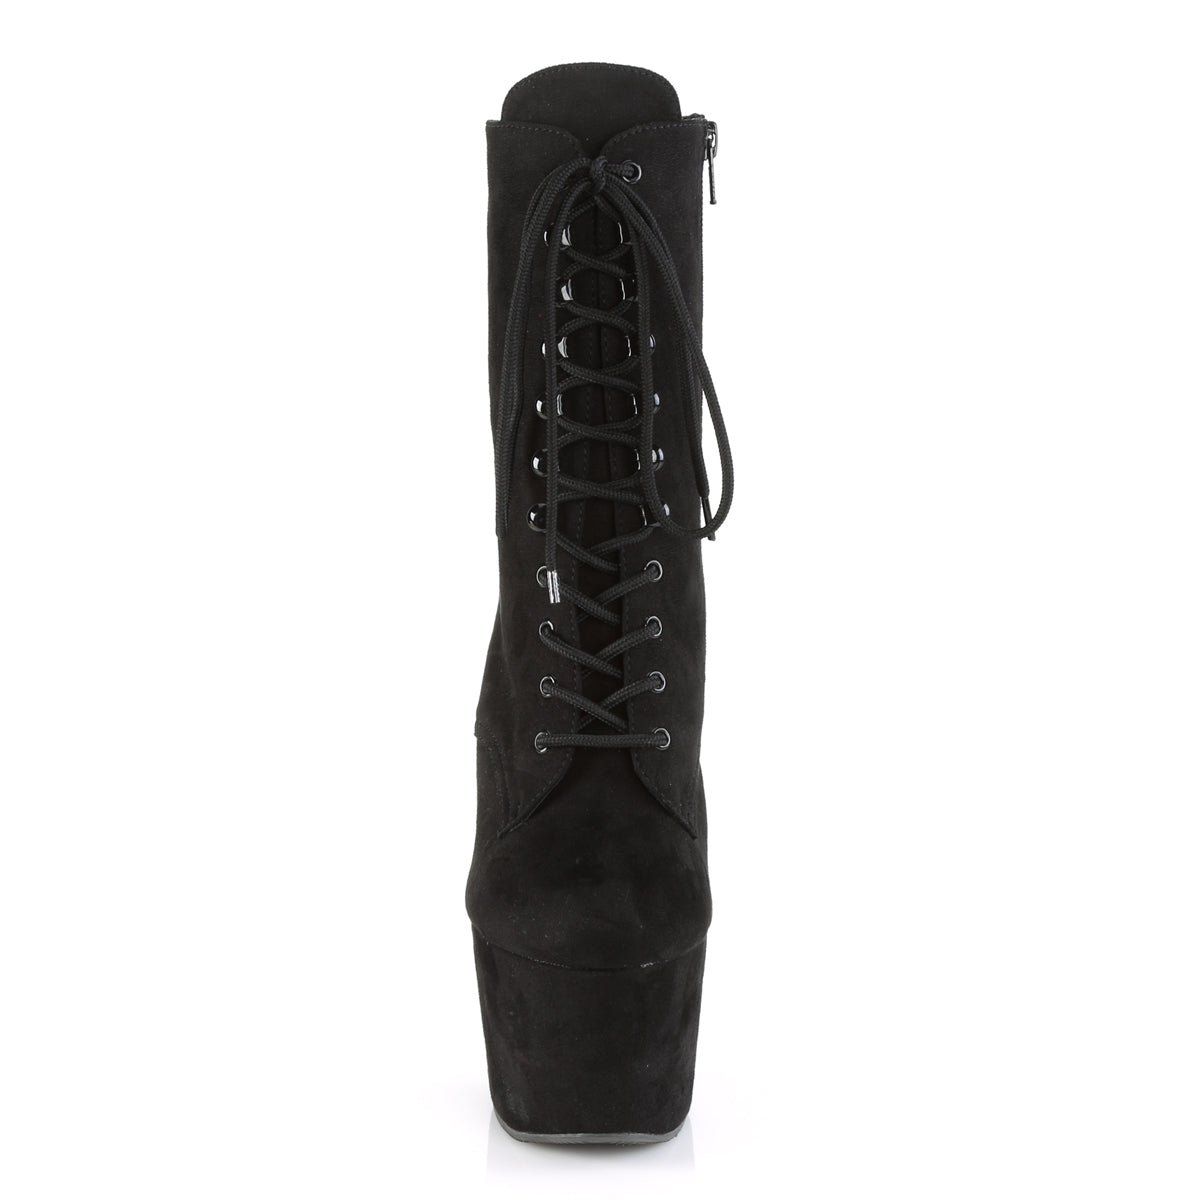 ADORE-1020FS Pleaser 7" Heel Black Exotic Dancing Ankle Boot-Pleaser- Sexy Shoes Alternative Footwear